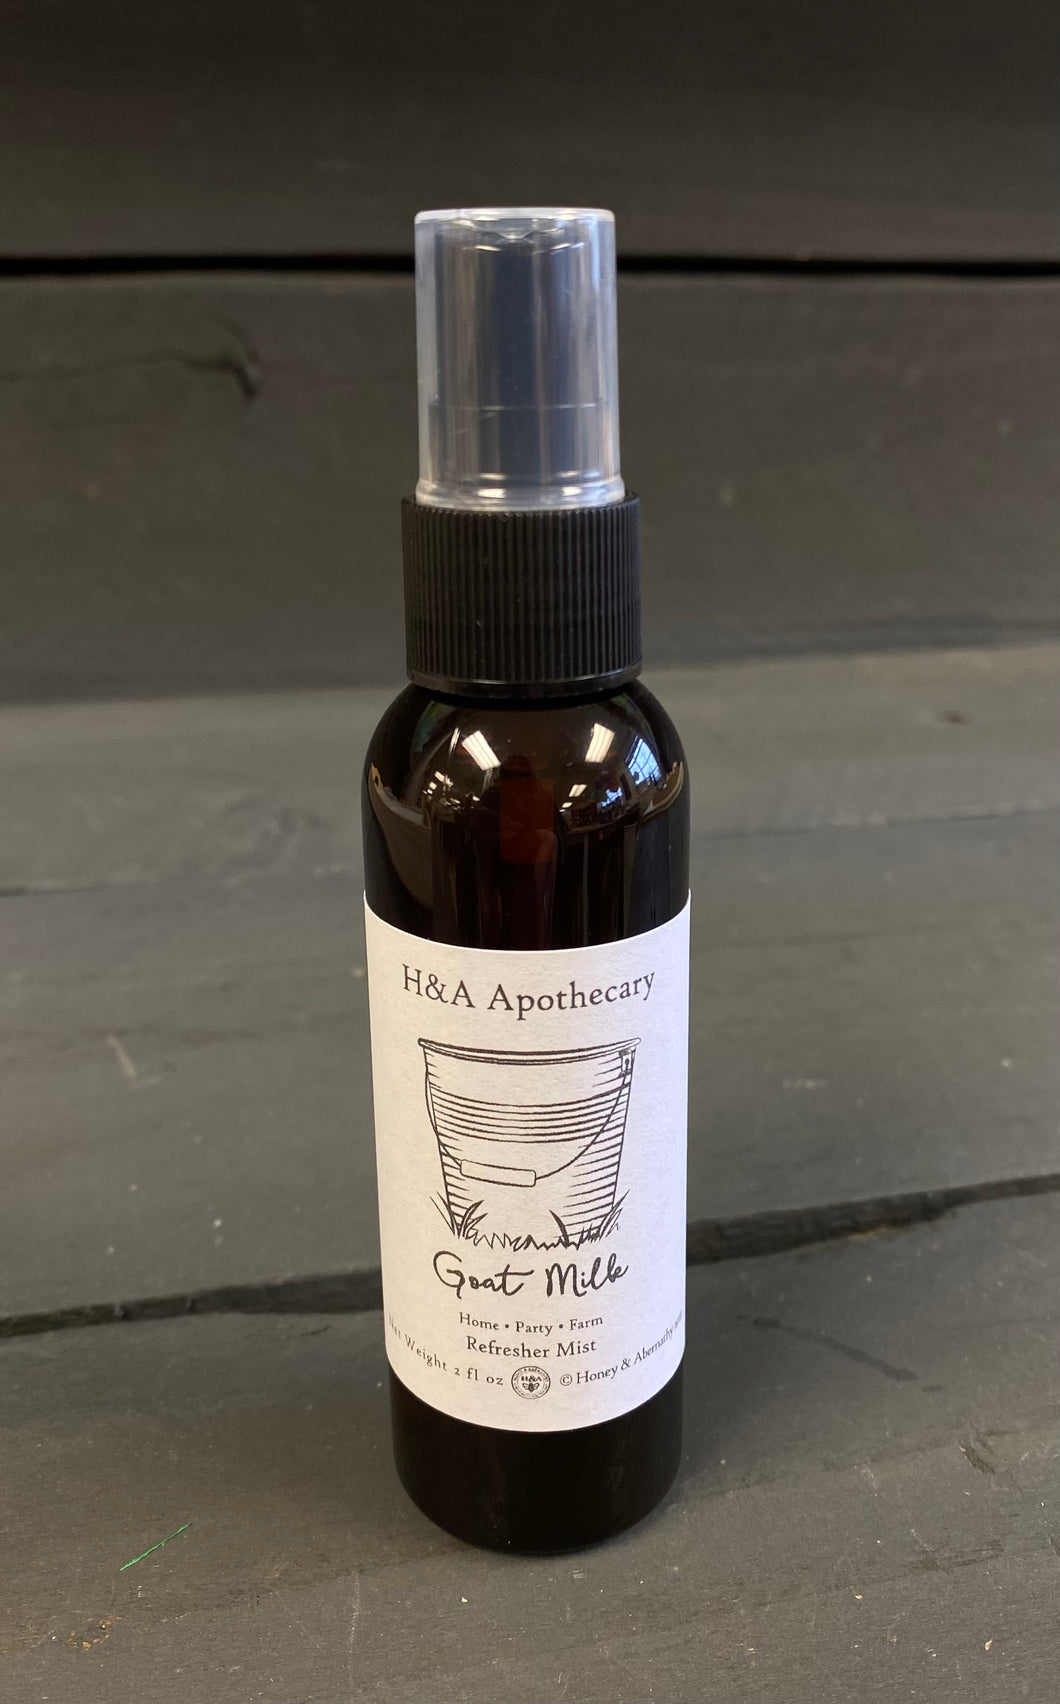 H&A Apothecary Goat Milk Refresher Mist